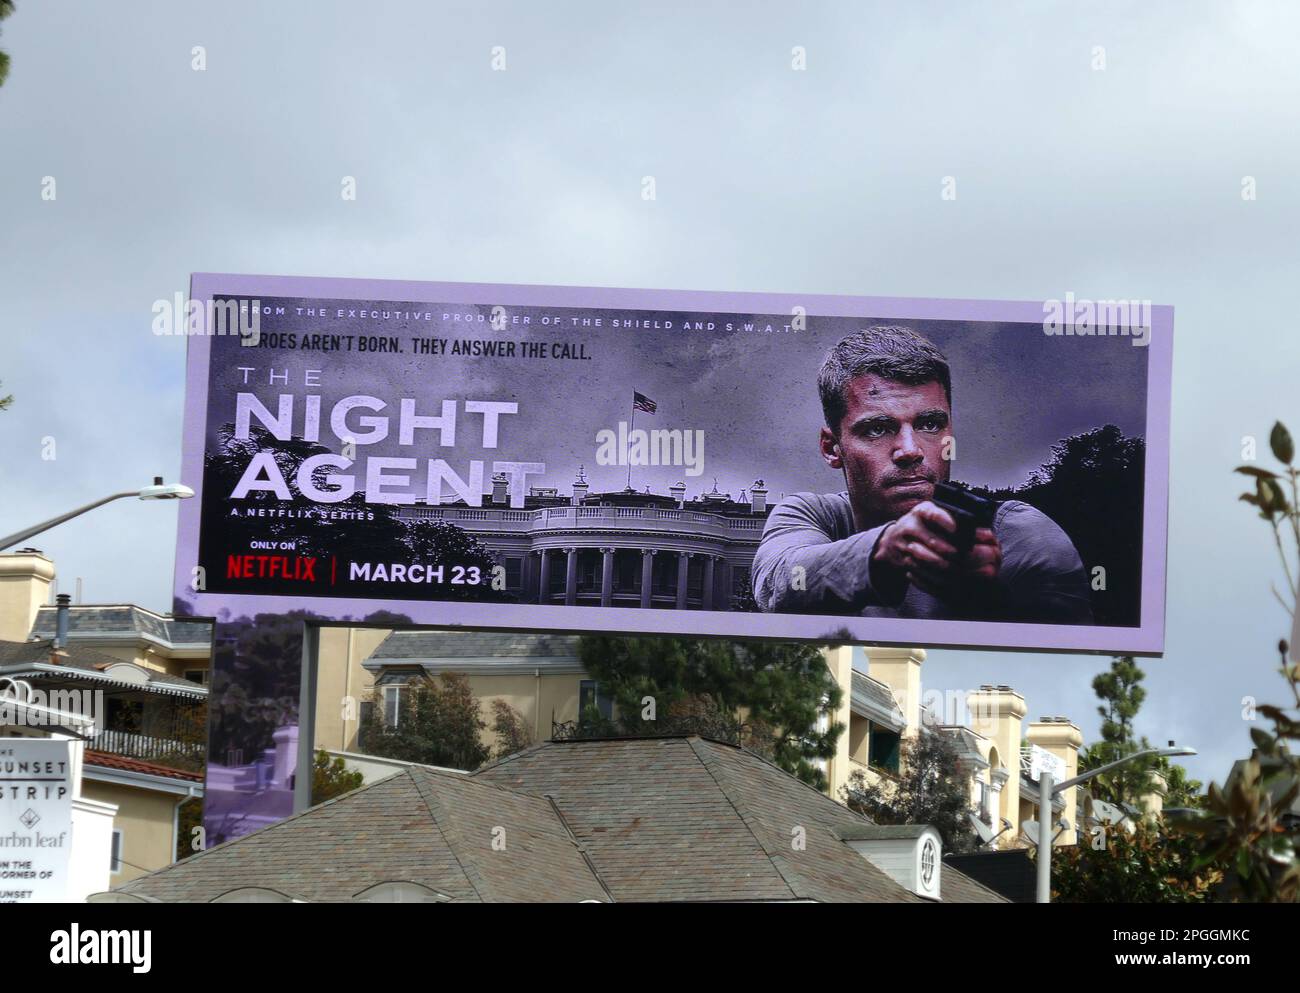 Los Angeles California Usa 21st March 2023 A General View Of Atmosphere Of The Night Agent Billboard On Sunset Blvd On March 21 2023 In Los Angeles California Usa Photo By Barry Kingalamy Stock Photo 2PGGMKC 